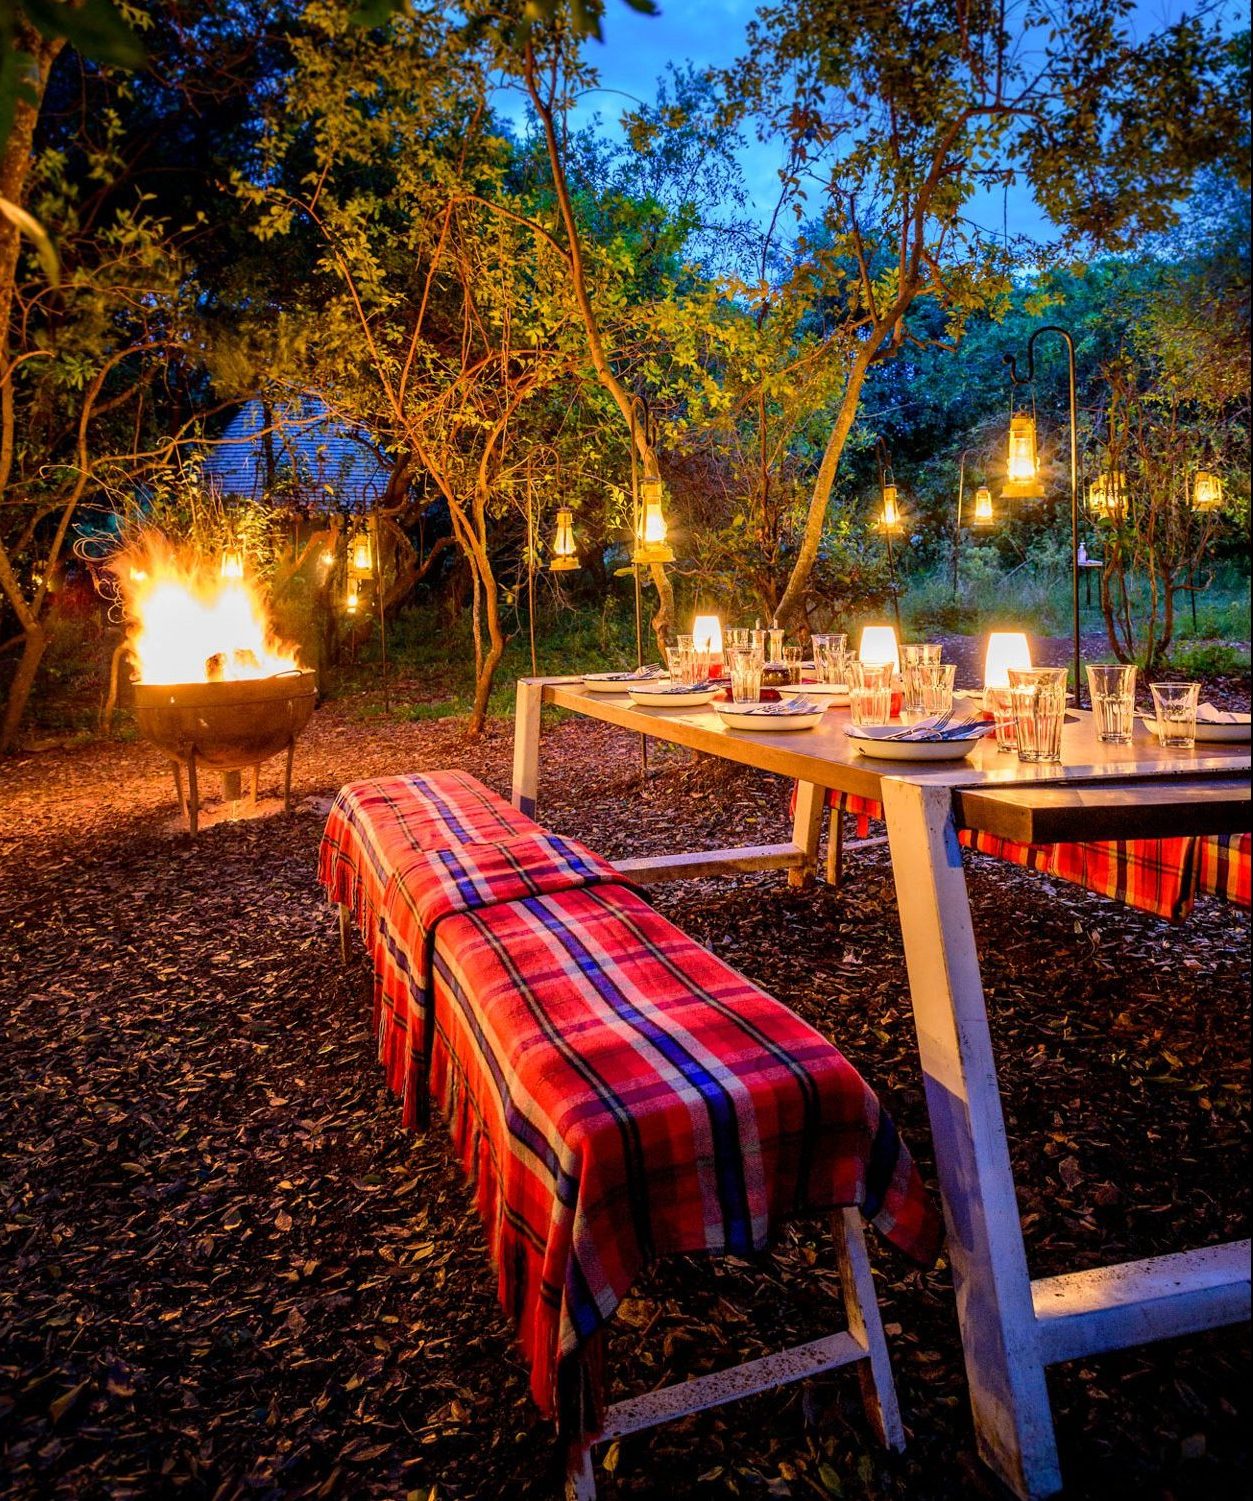 A hearty red wine pairs perfectly with a lantern-lit evening in the forest  